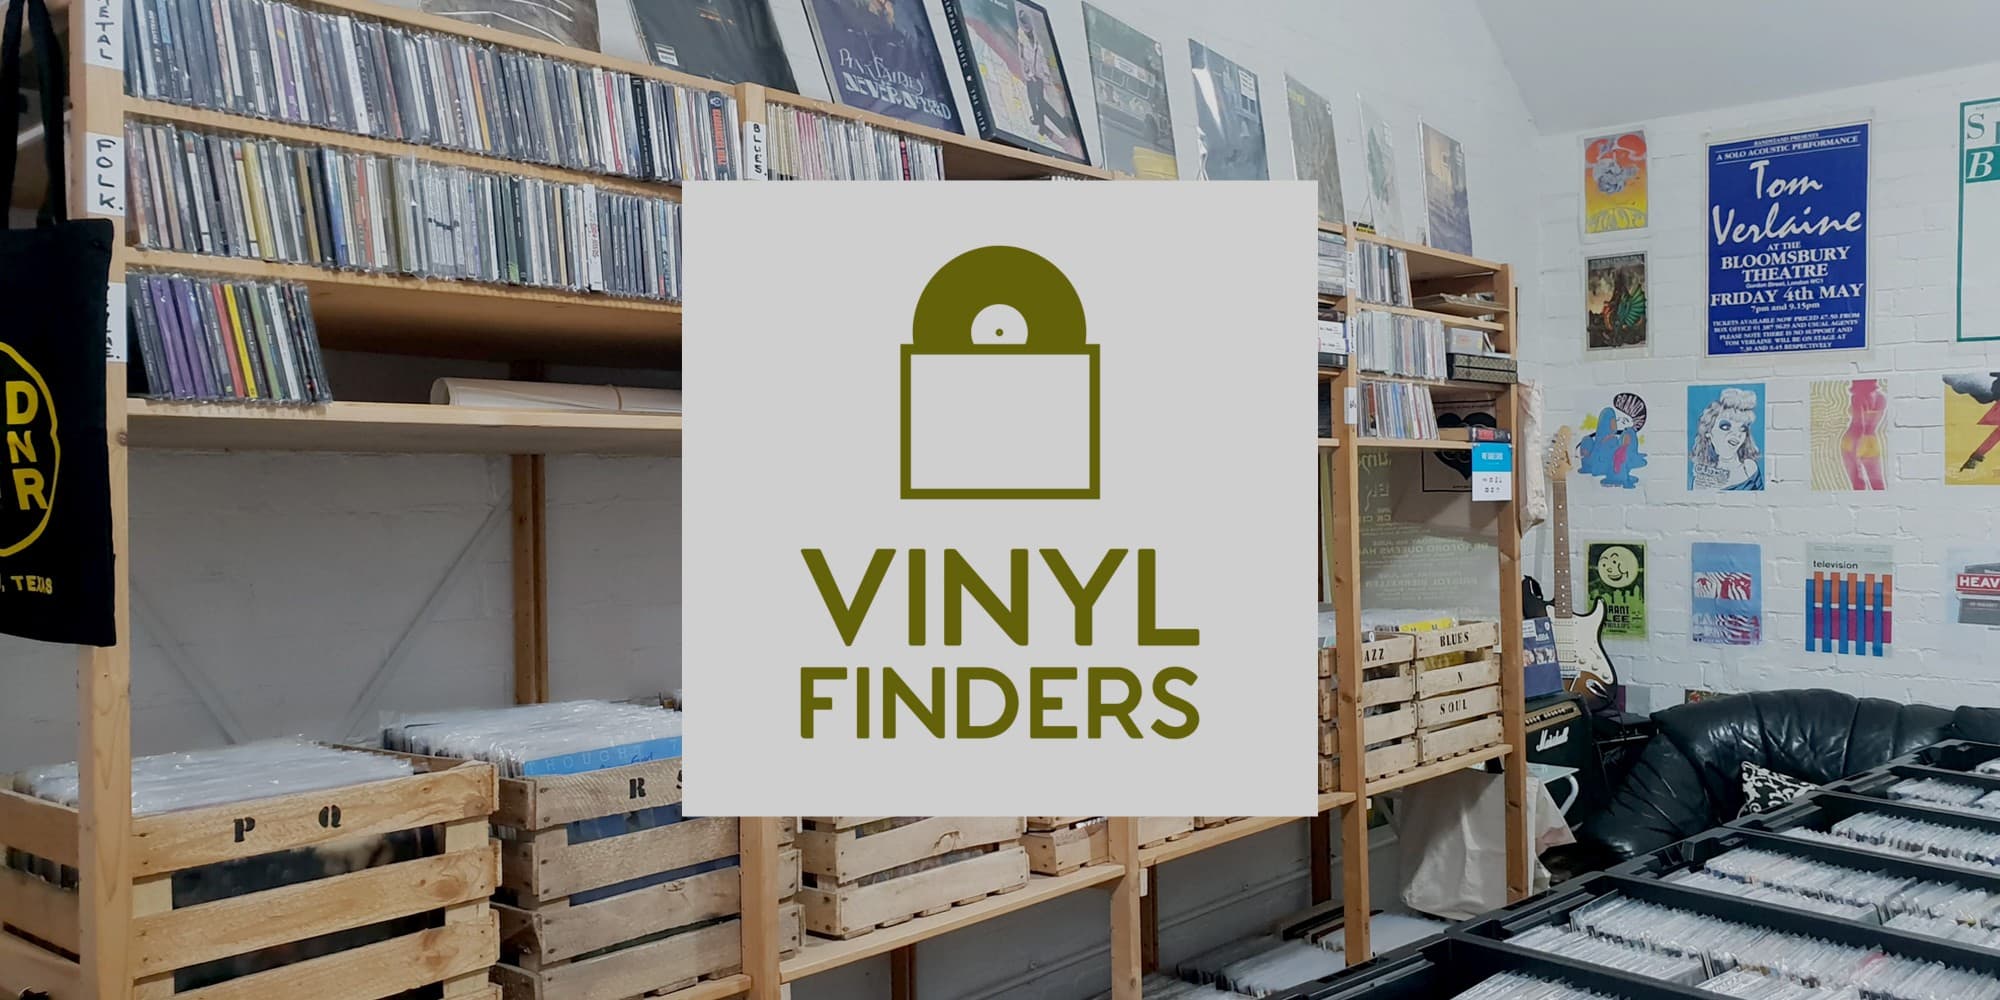 Vinylfinders record and CD shop